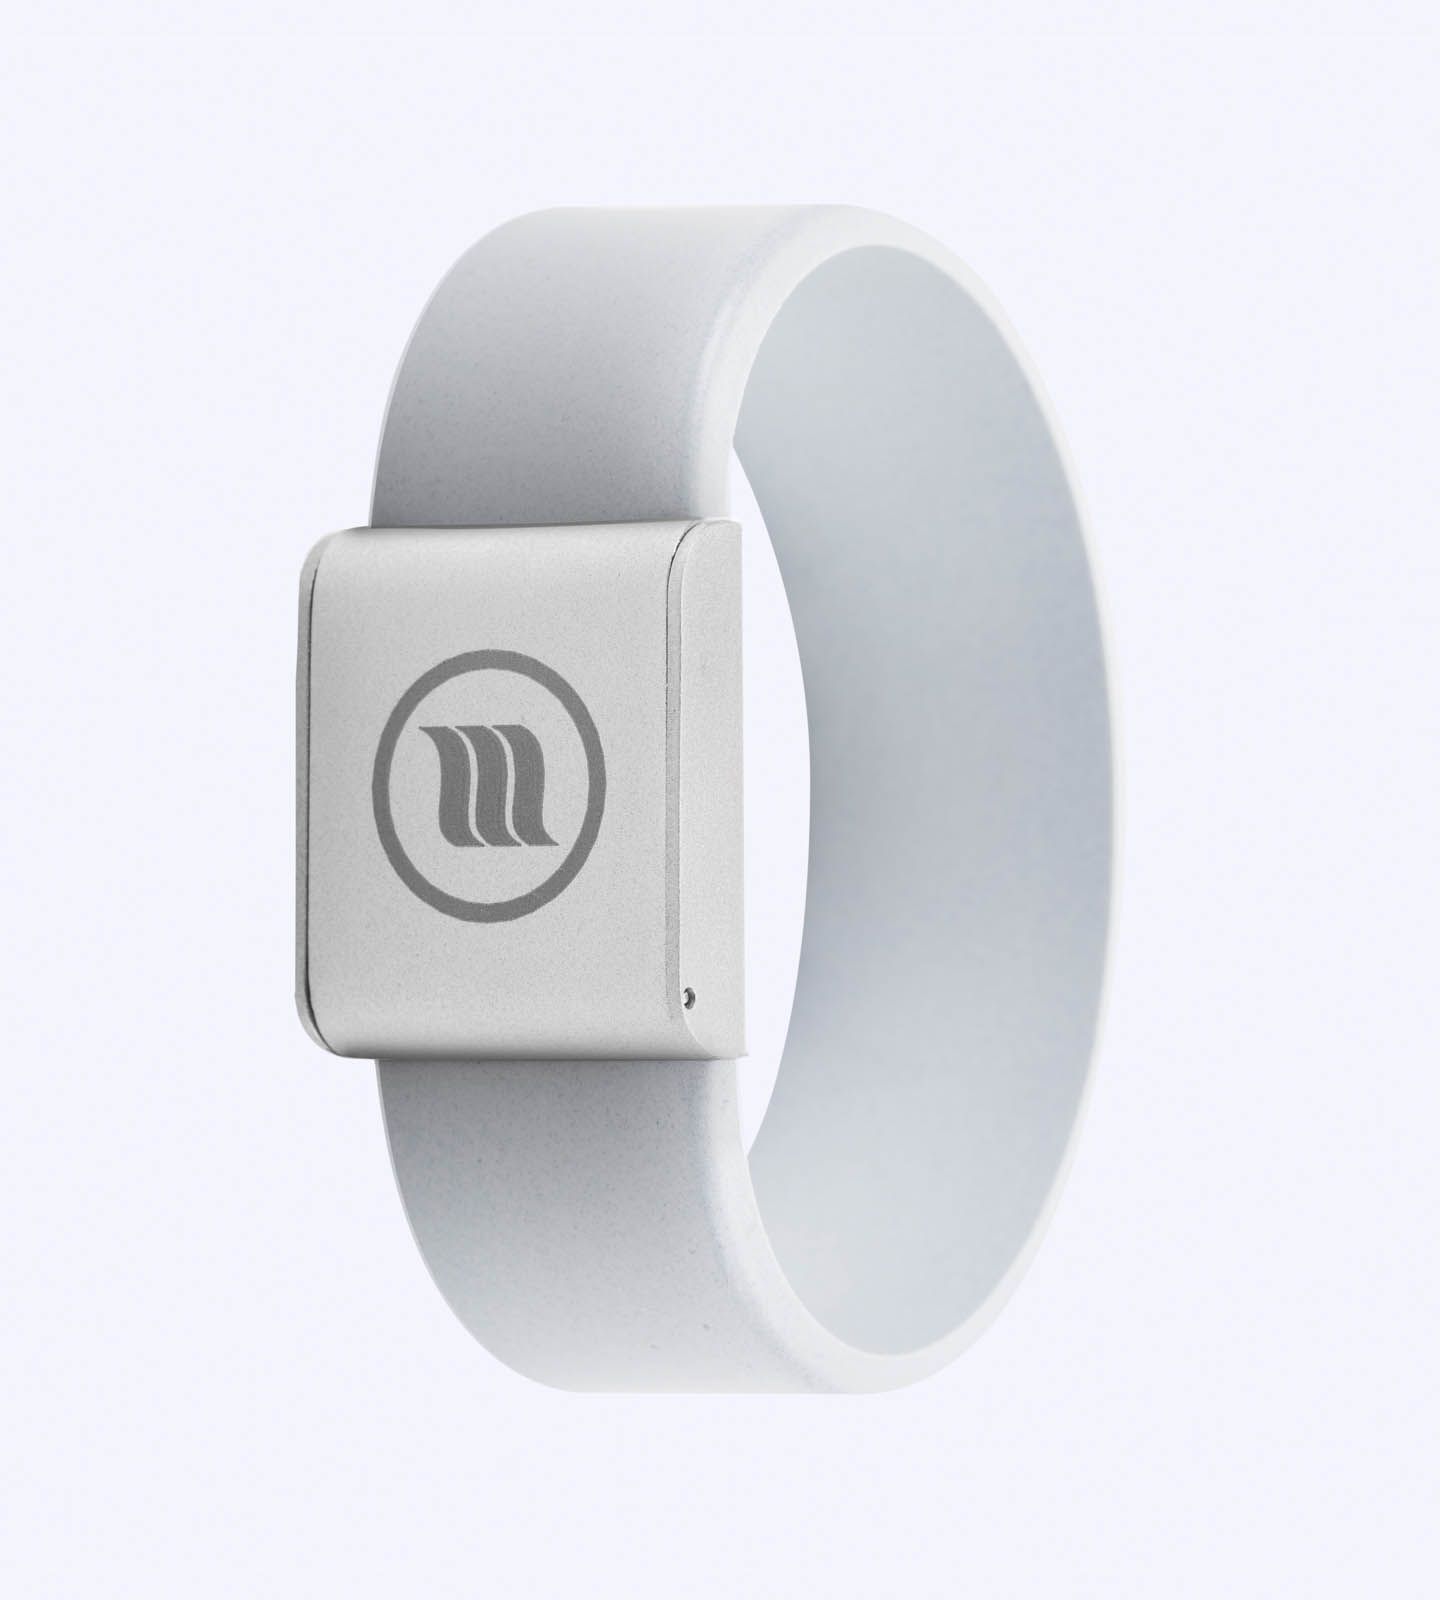 EMF protection on the go is possible by wearing the EMF memonizerBODY. The stylish steel and & silicone bracelet may be trimmed to fit any size. Your Serenity Inc.